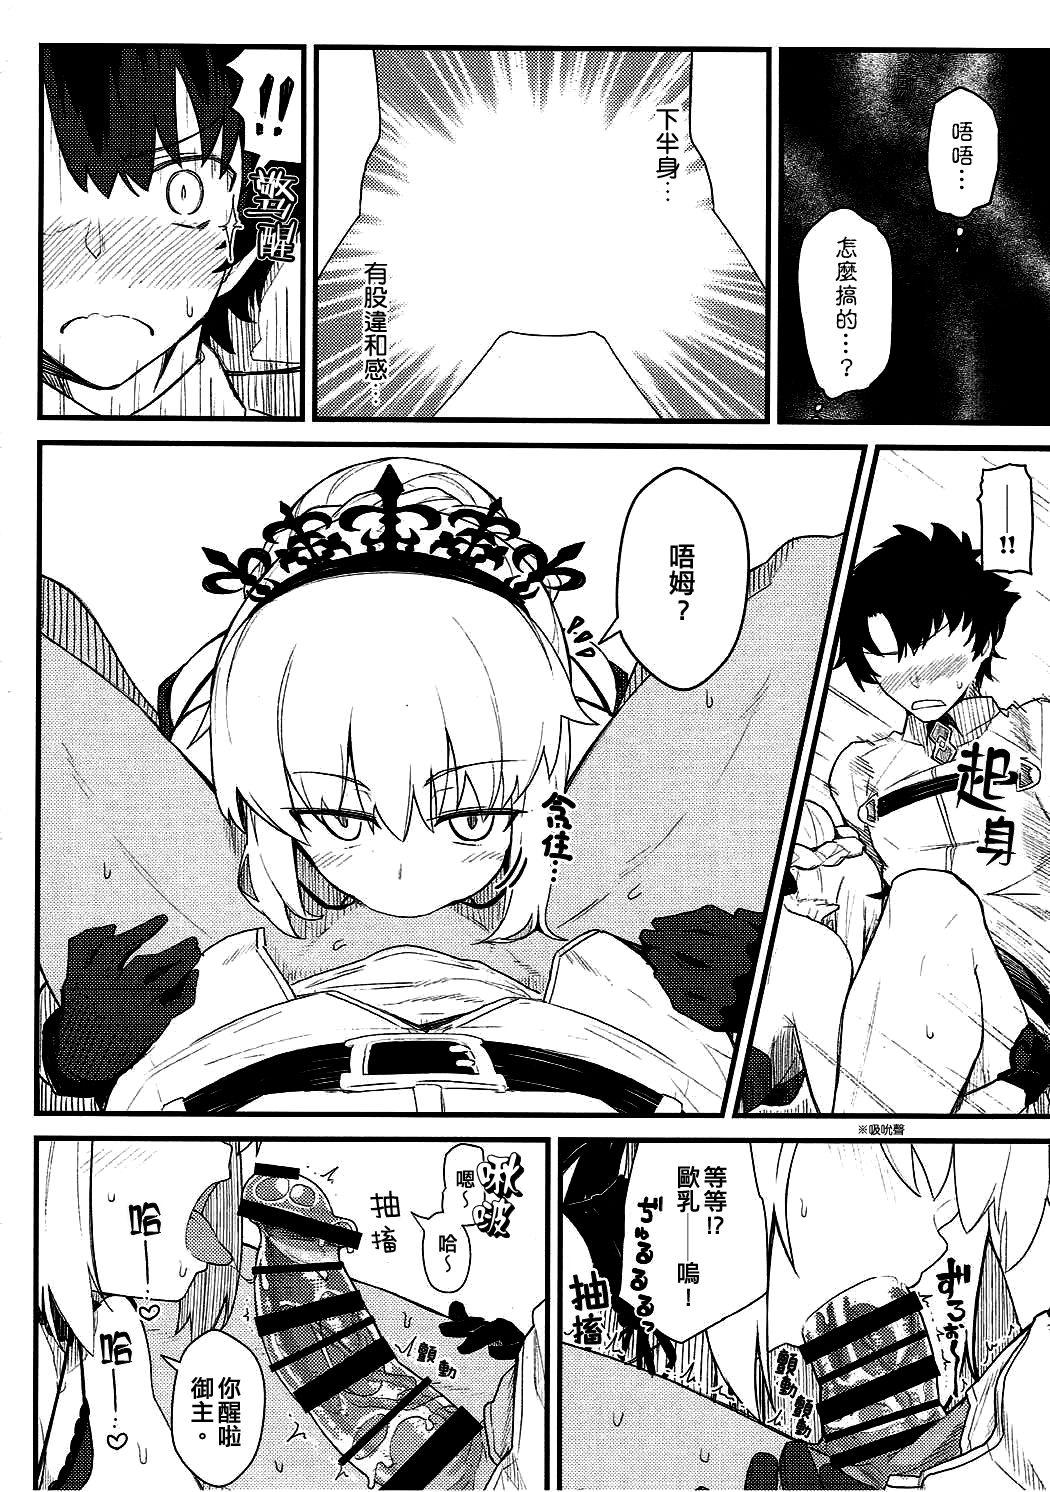 Best Blowjobs GIRLFriend's 14 - Fate grand order Perverted - Page 3